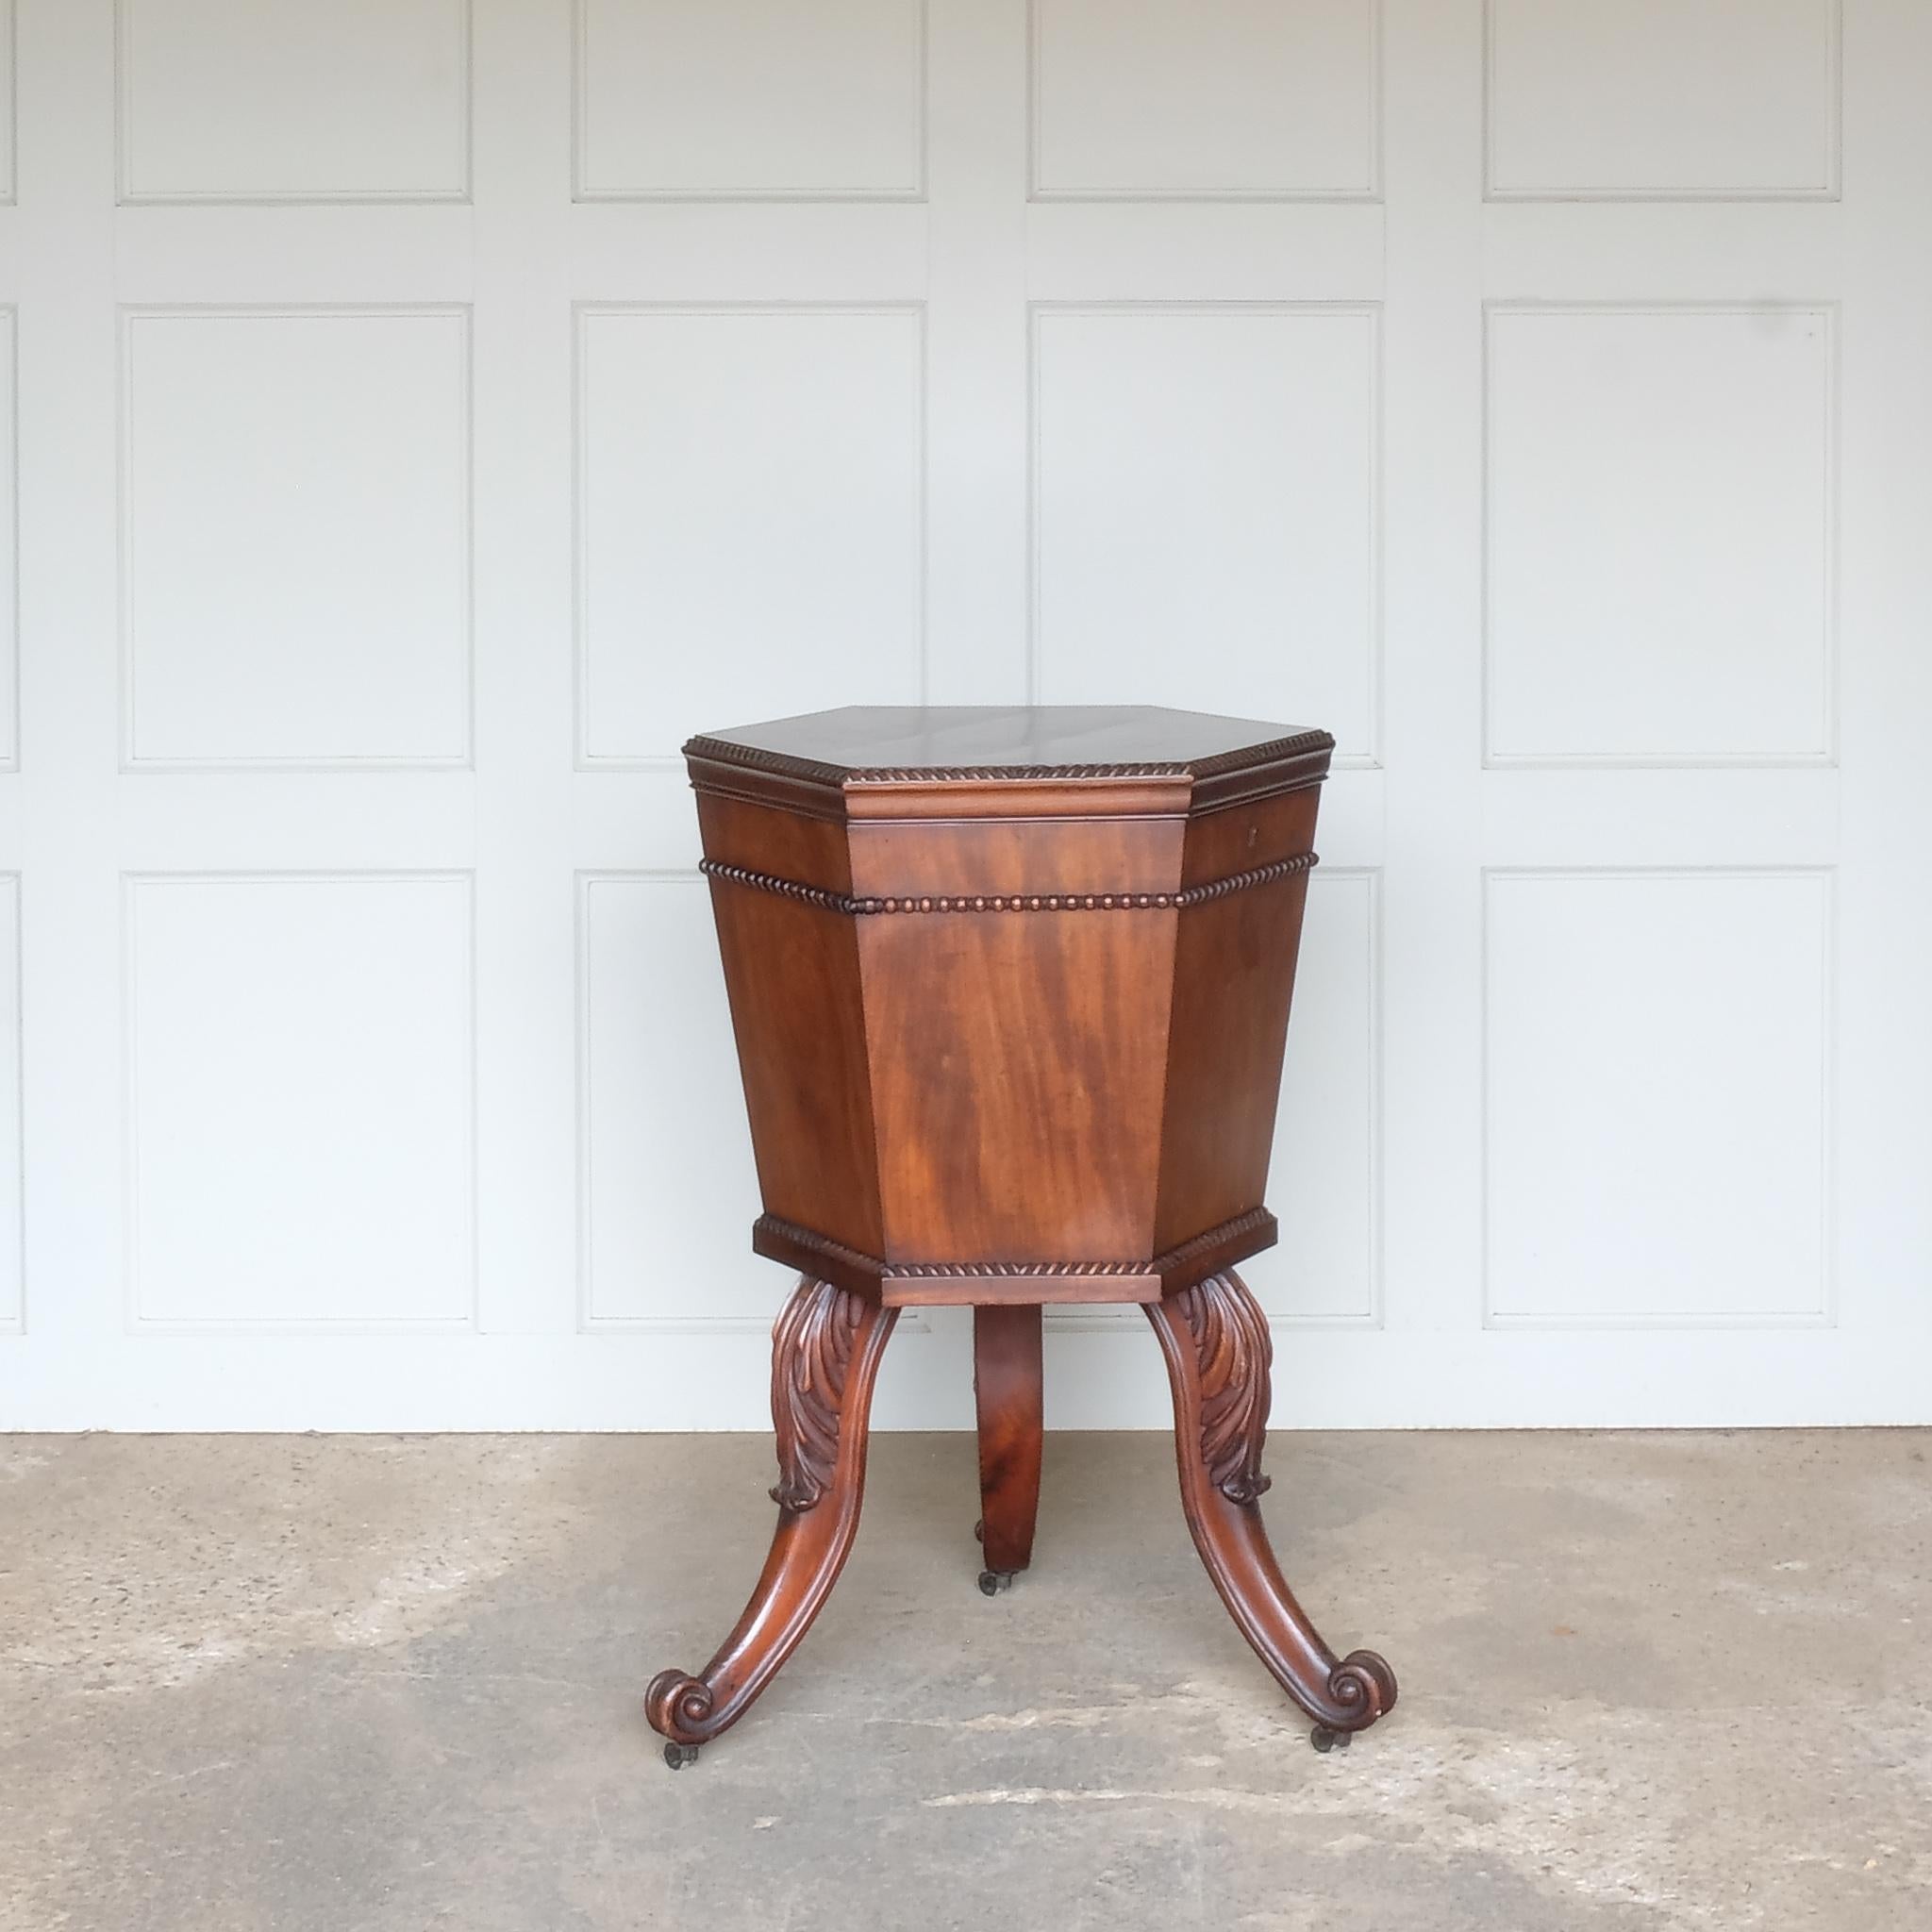 Hexagonal Mahogany Wine Cooler In Good Condition For Sale In Kettering, GB